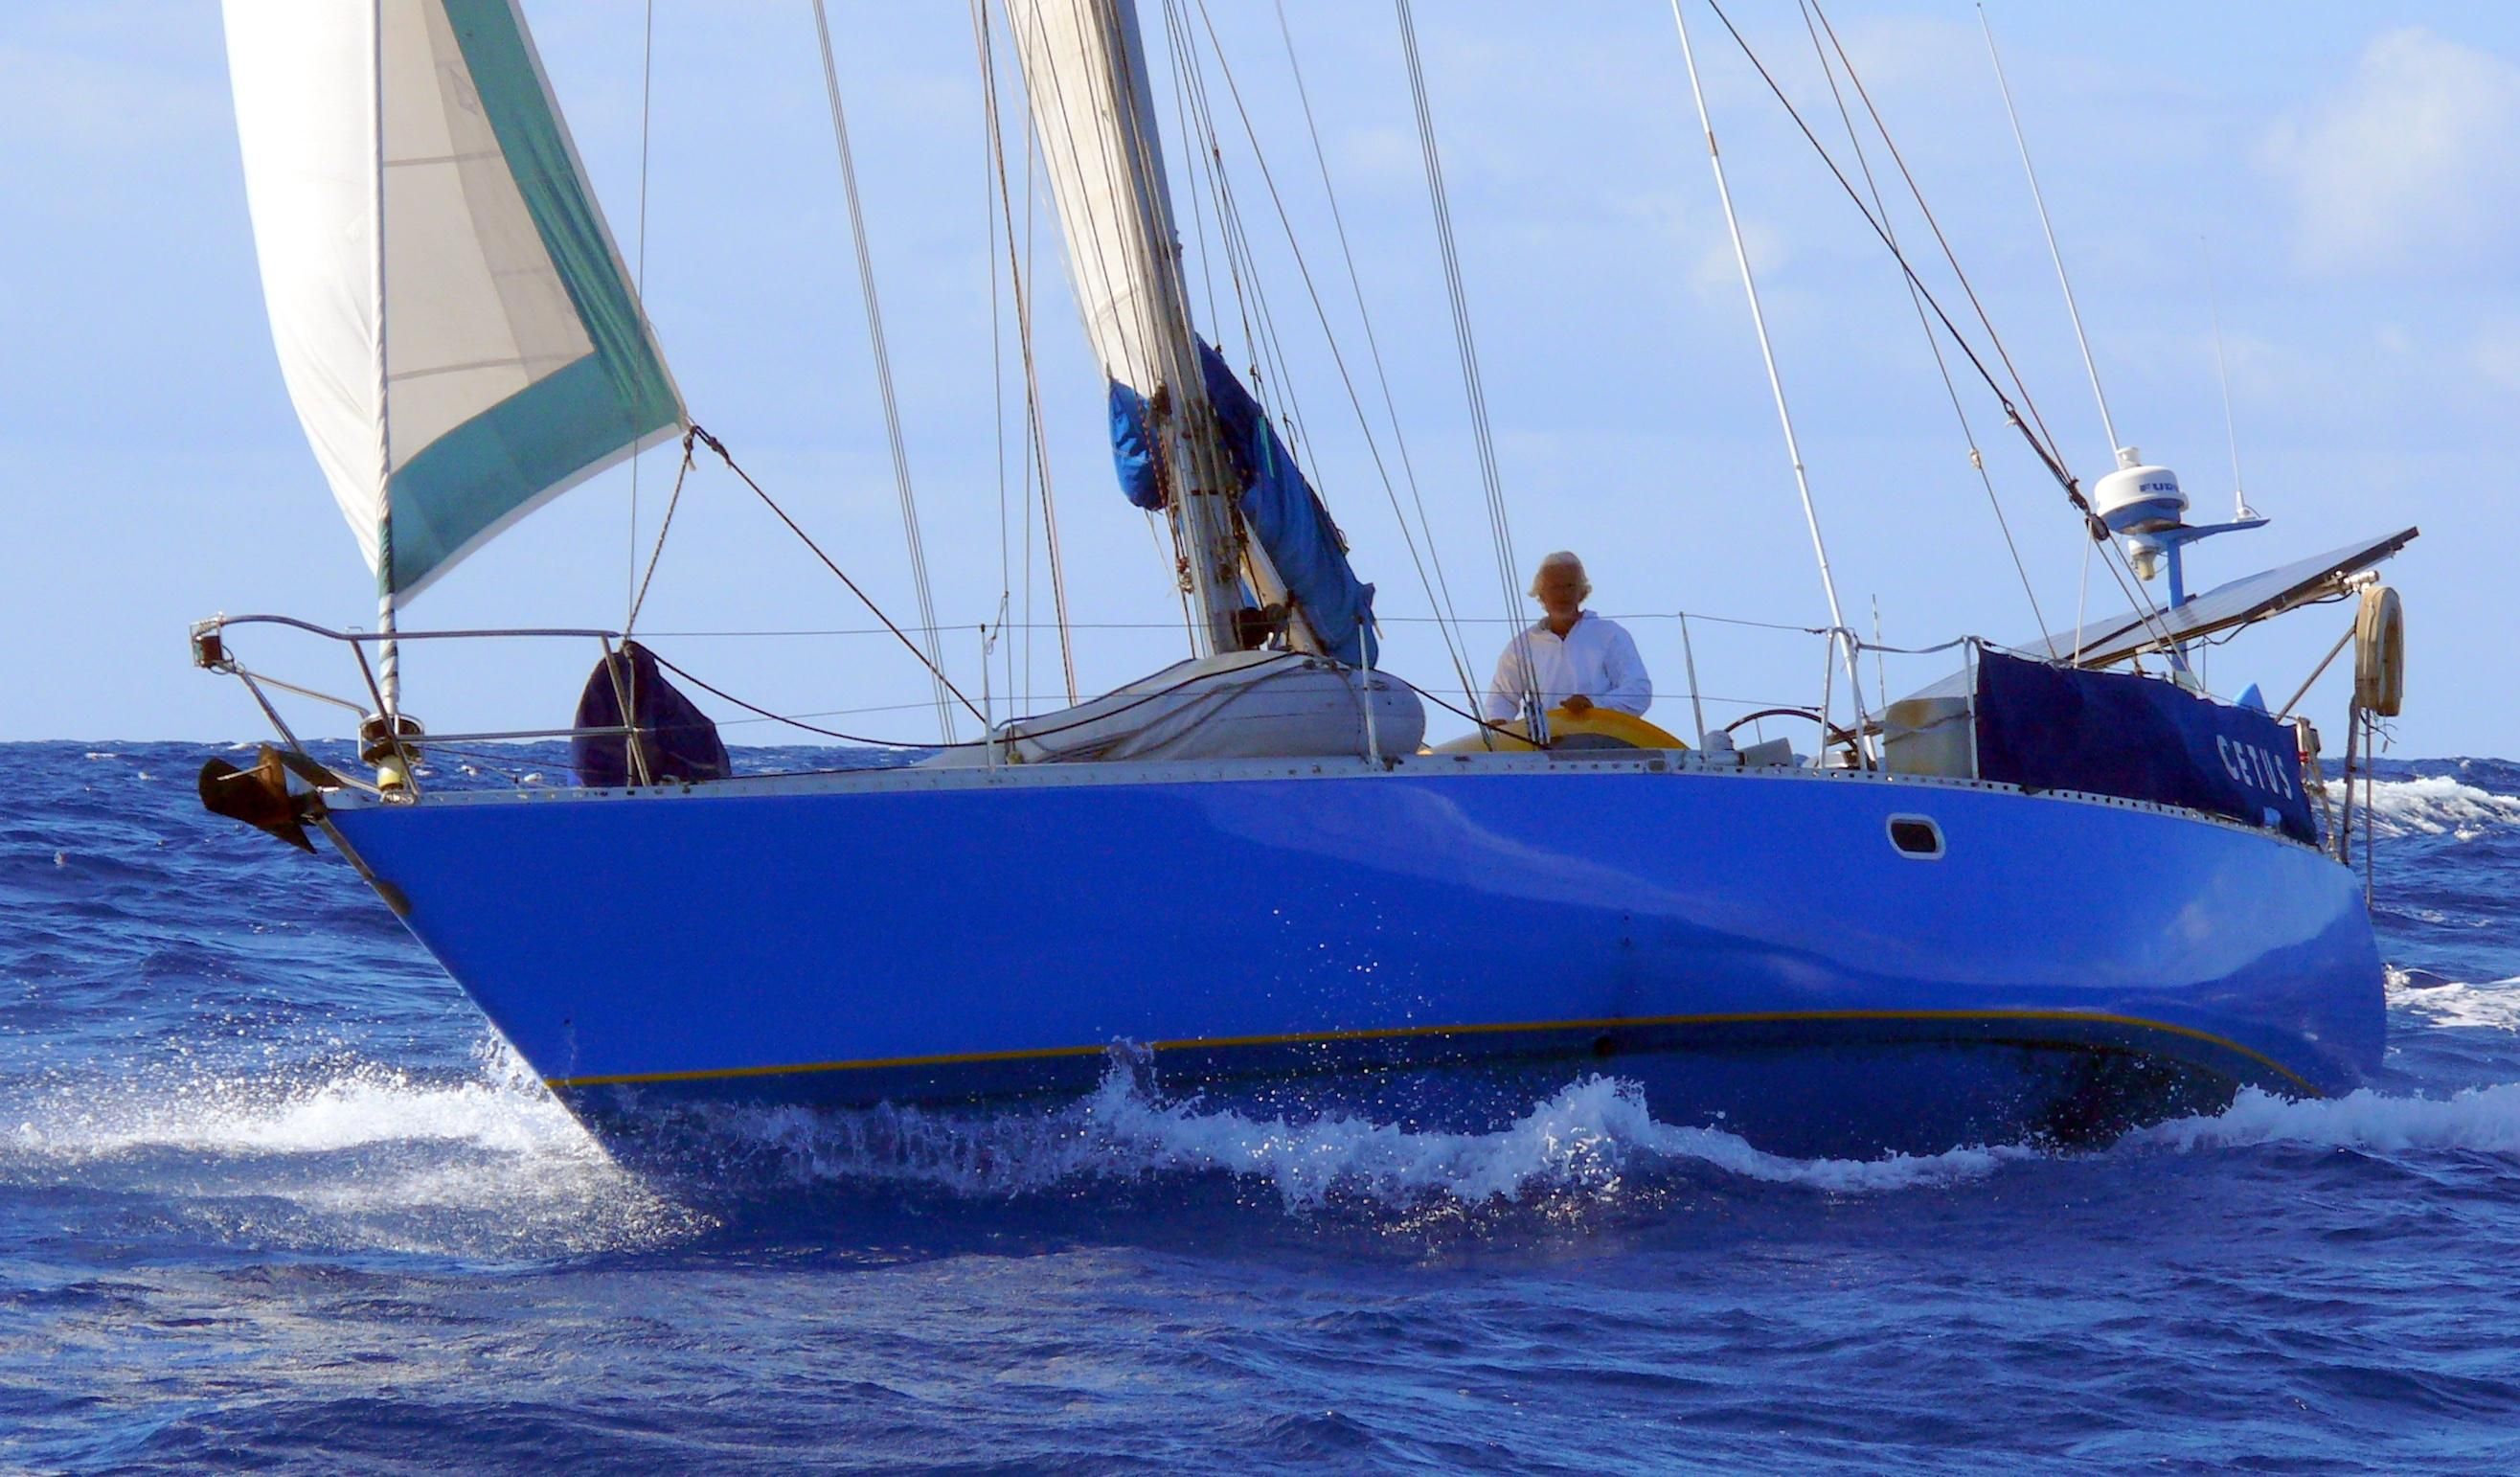 racing sailboats for sale in florida